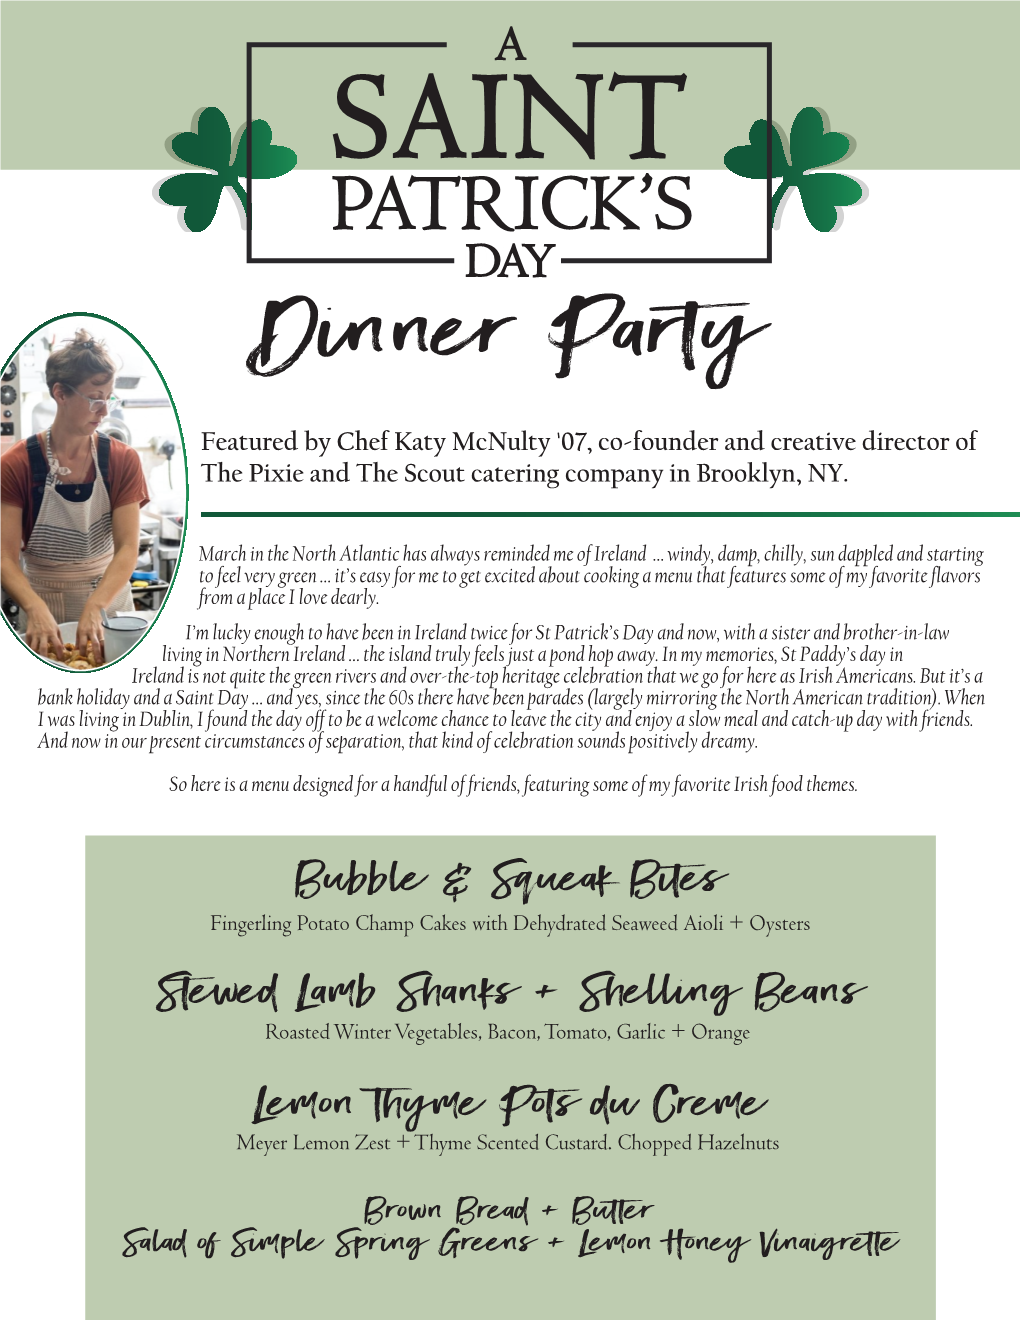 Recipes for This St. Patrick's Day Dinner